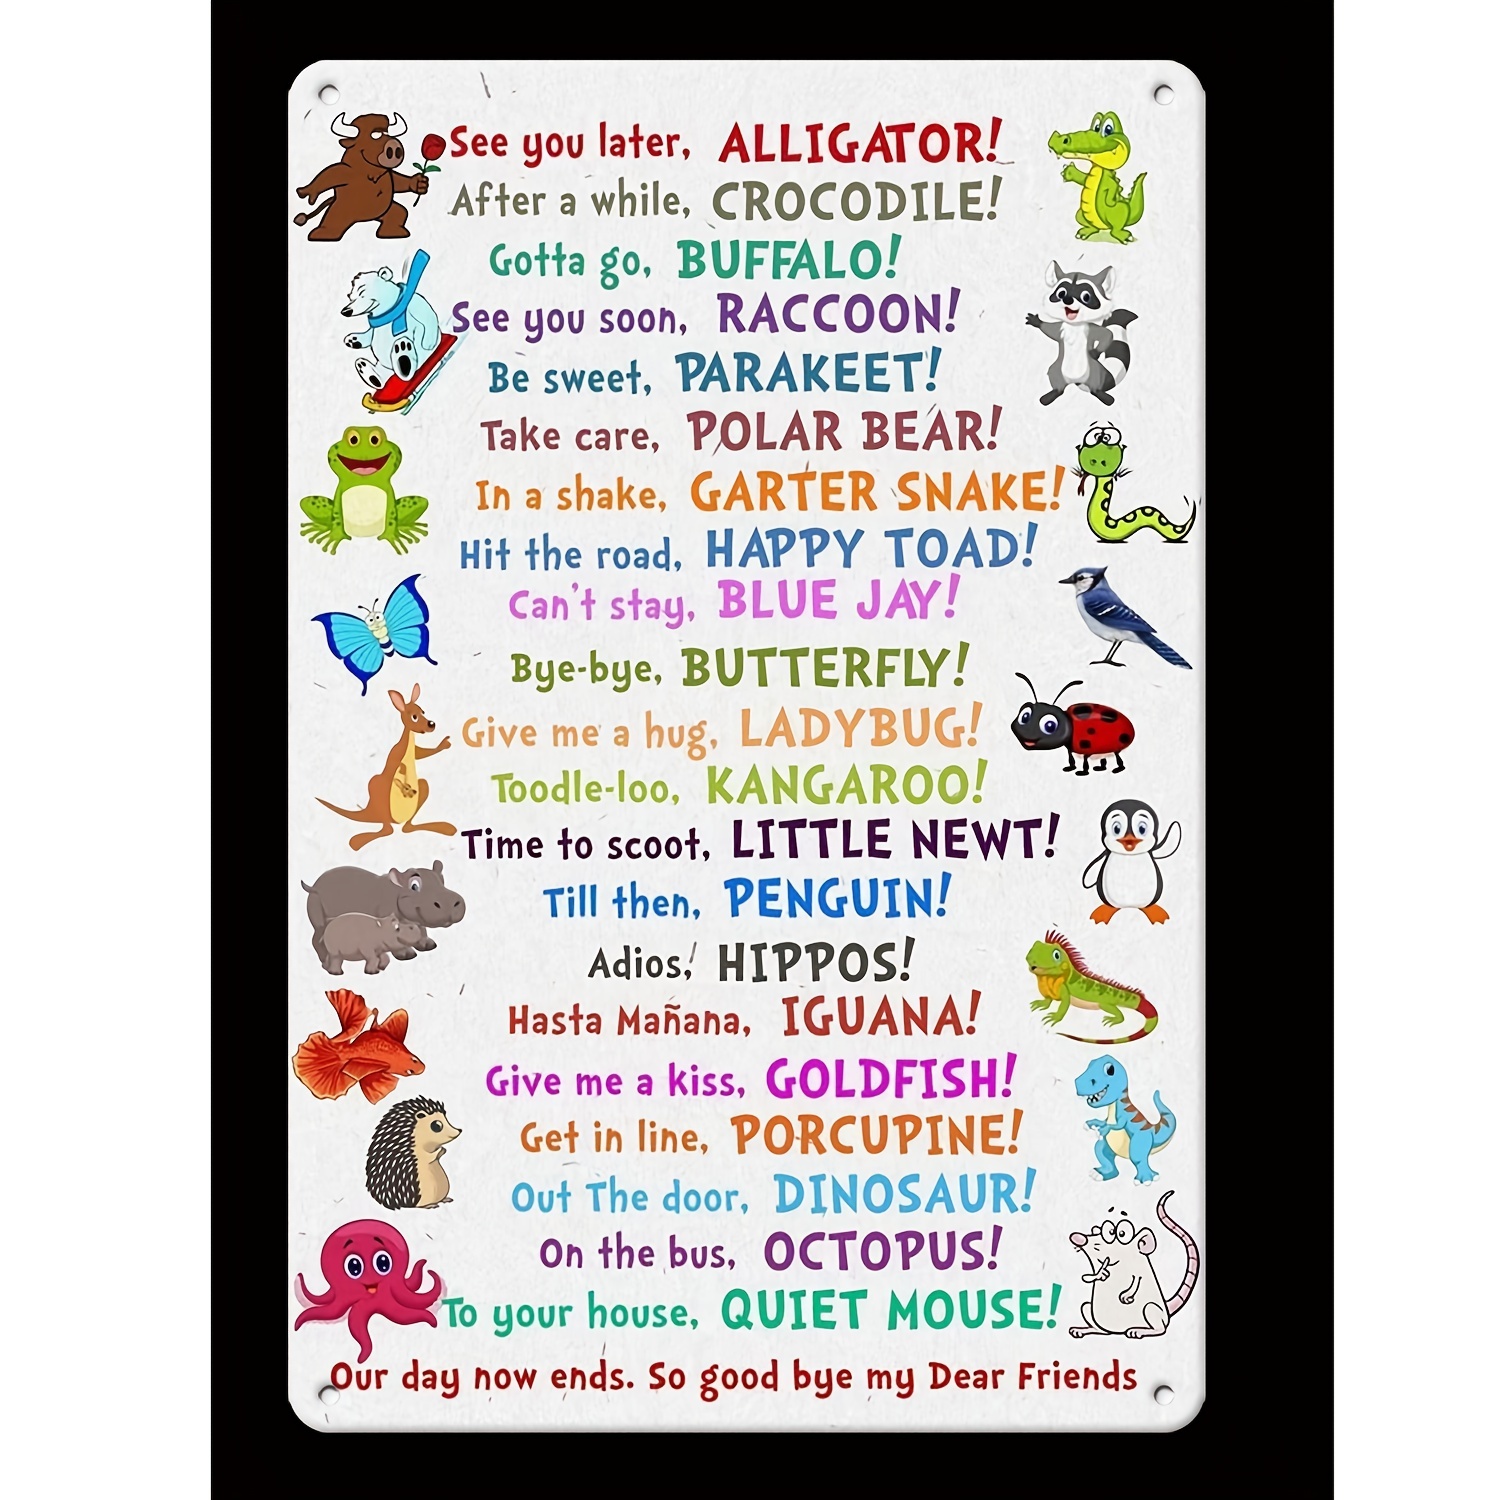 

1pc, Tin Metal Sign, Funny Animal Poster, See You Later Alligator Home Decor, Wall Art Christmas Housewarming Birthday Gifts, Back To School Student Teacher Office Decor (8''x12''/20cm*30cm)